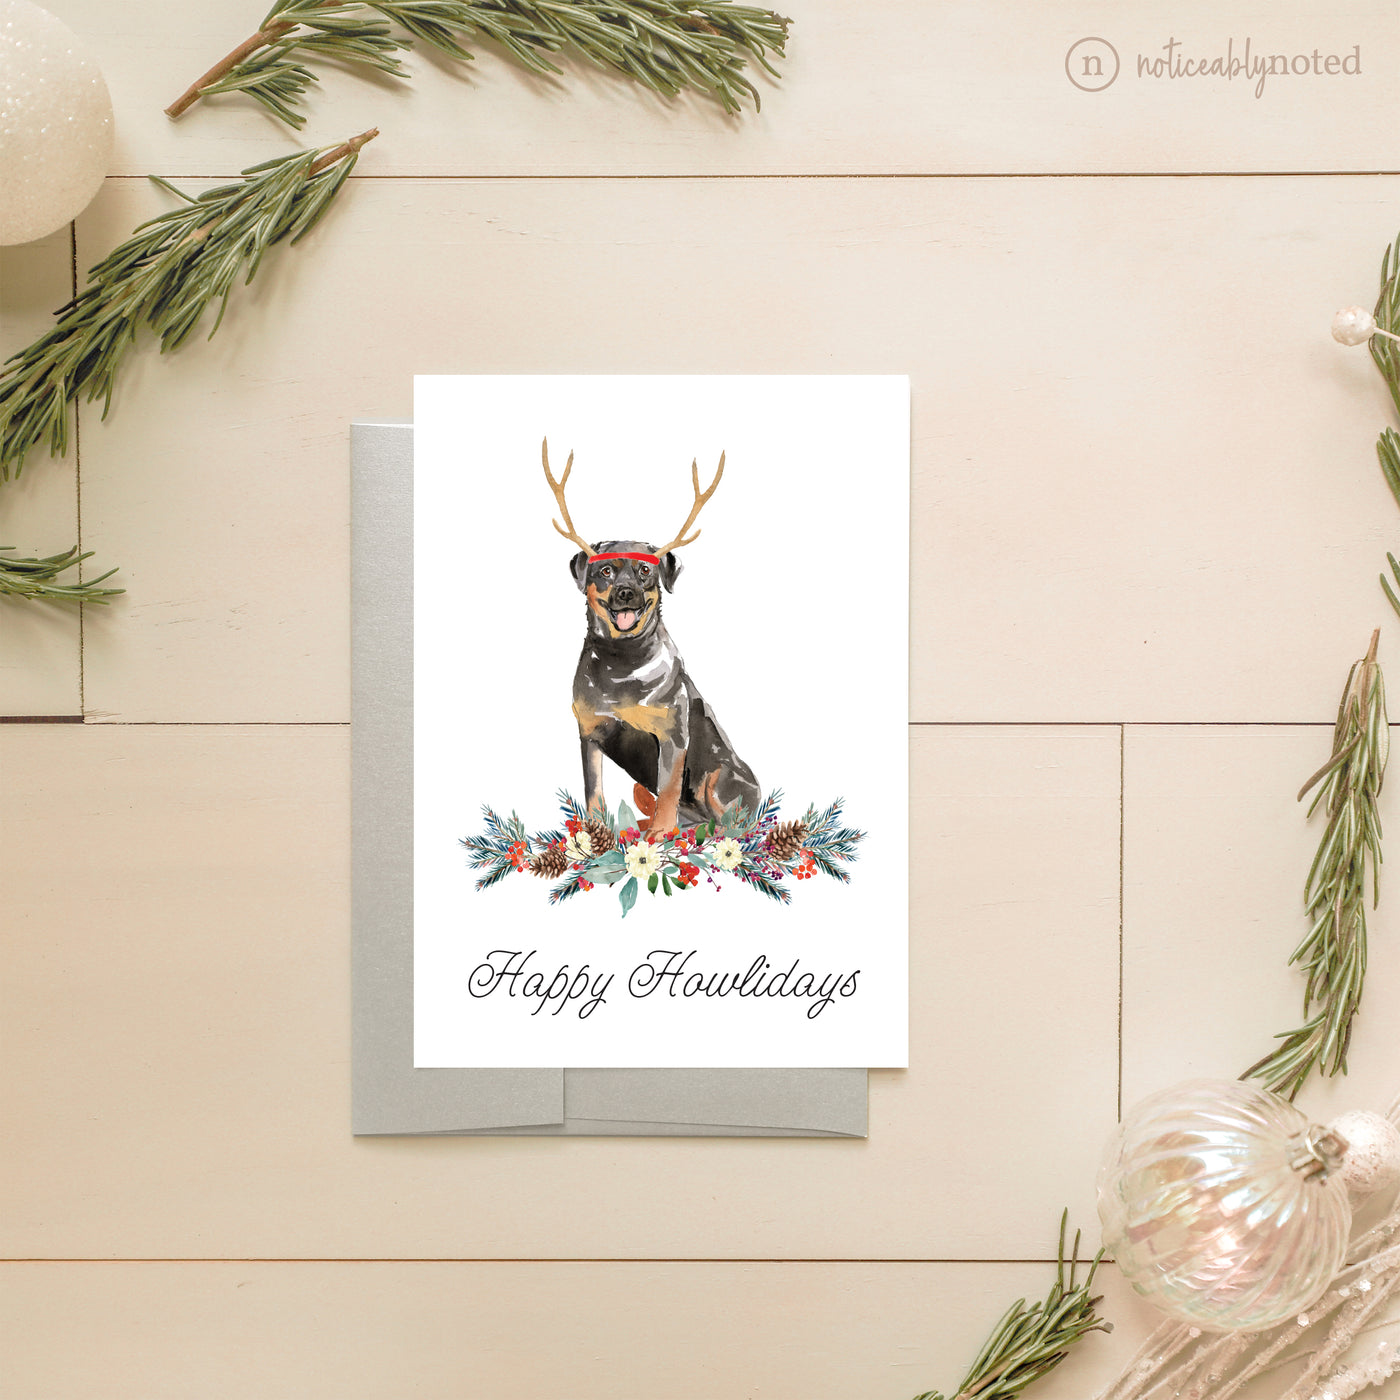 Rottweiler Dog Holiday Card | Noticeably Noted